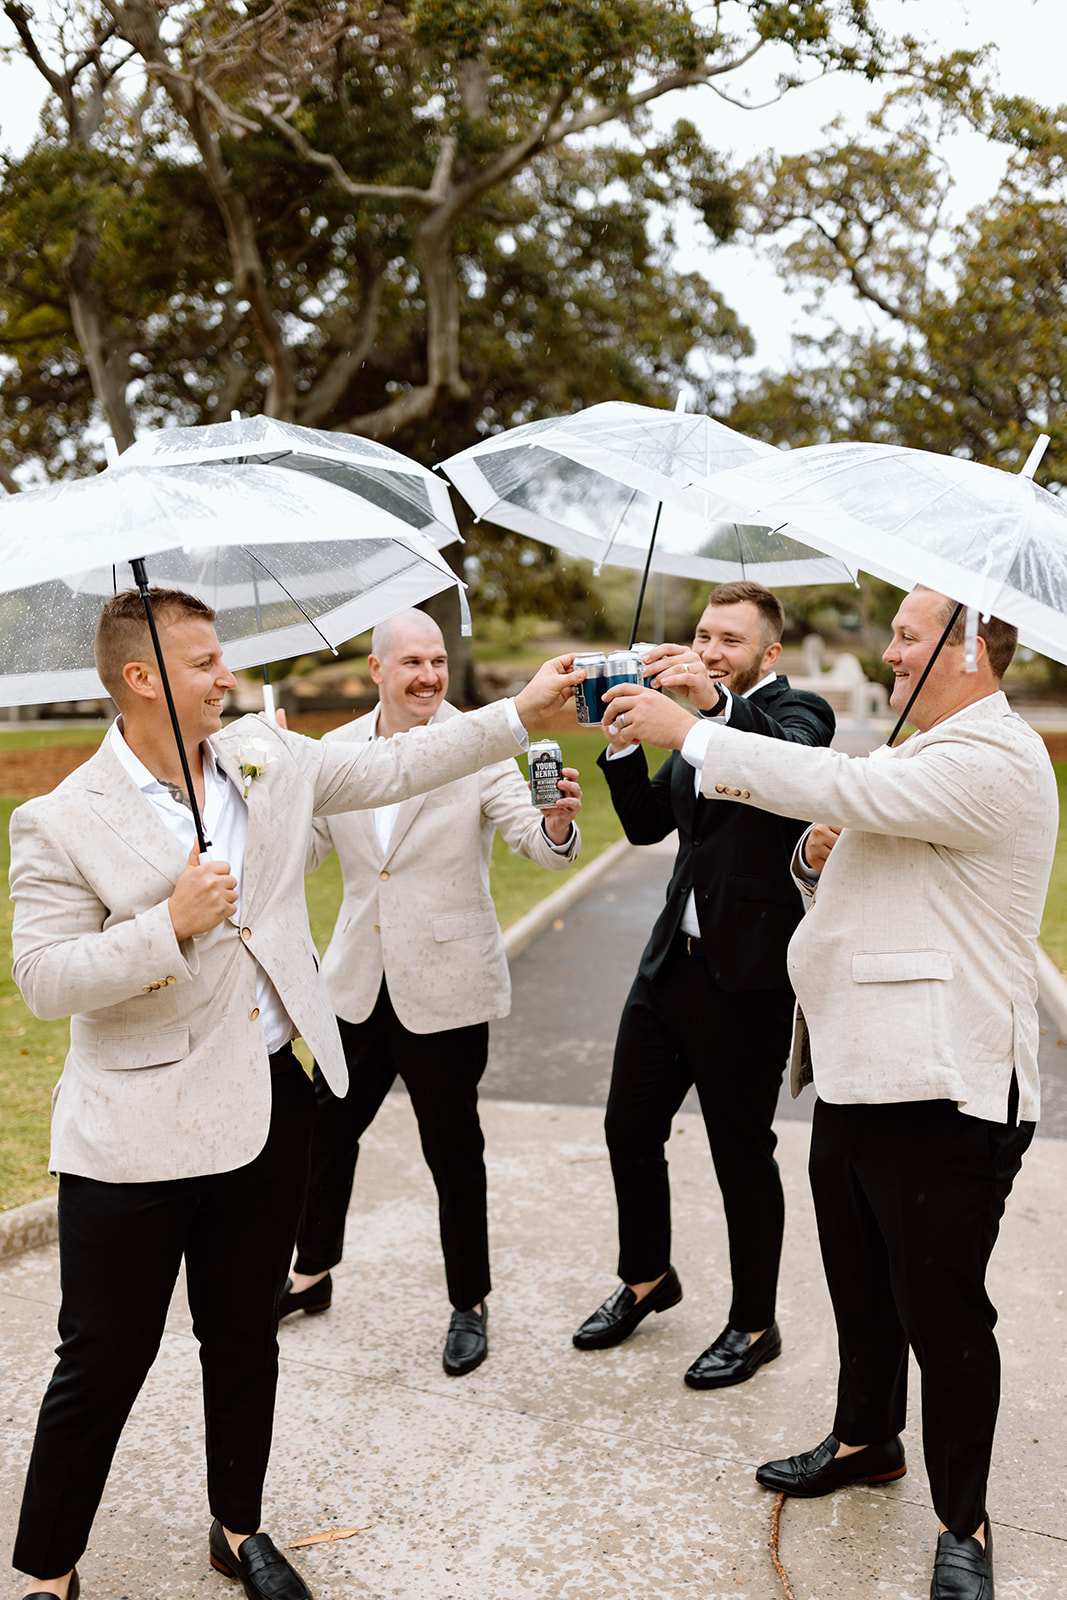 Groom with his groomsmen at the wedding in The Fernery Mosman